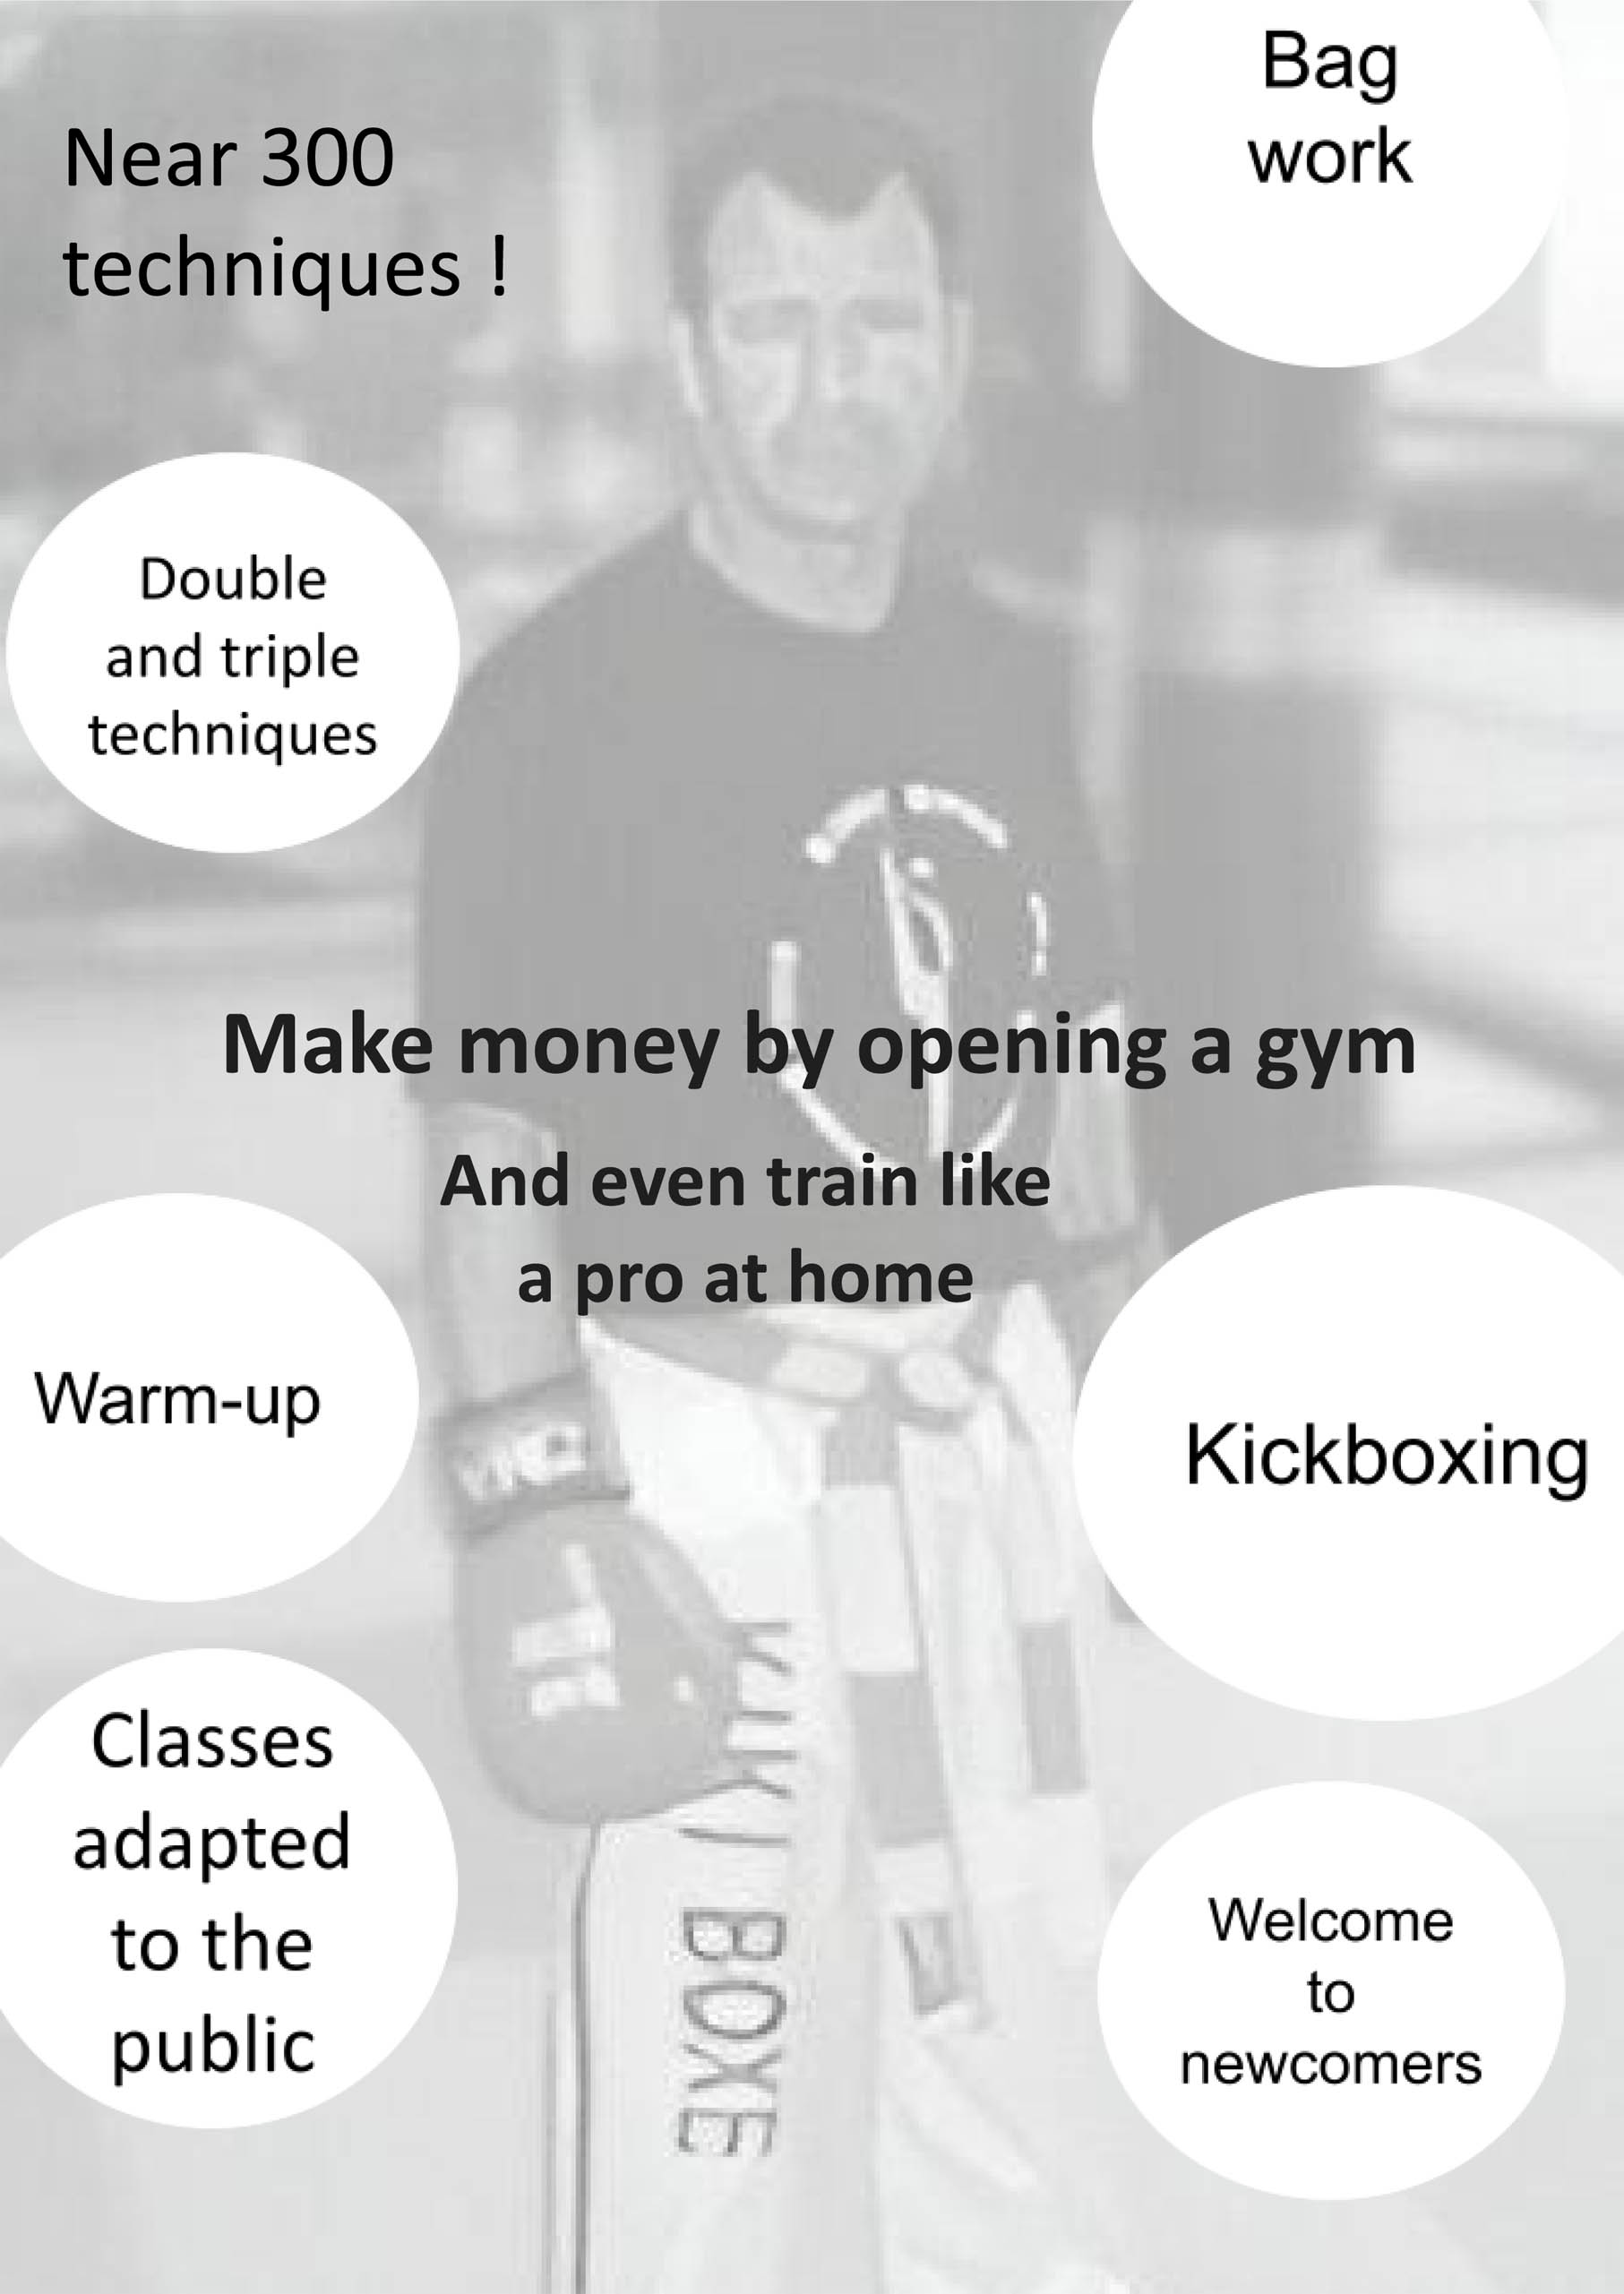 Make money by opening a gym